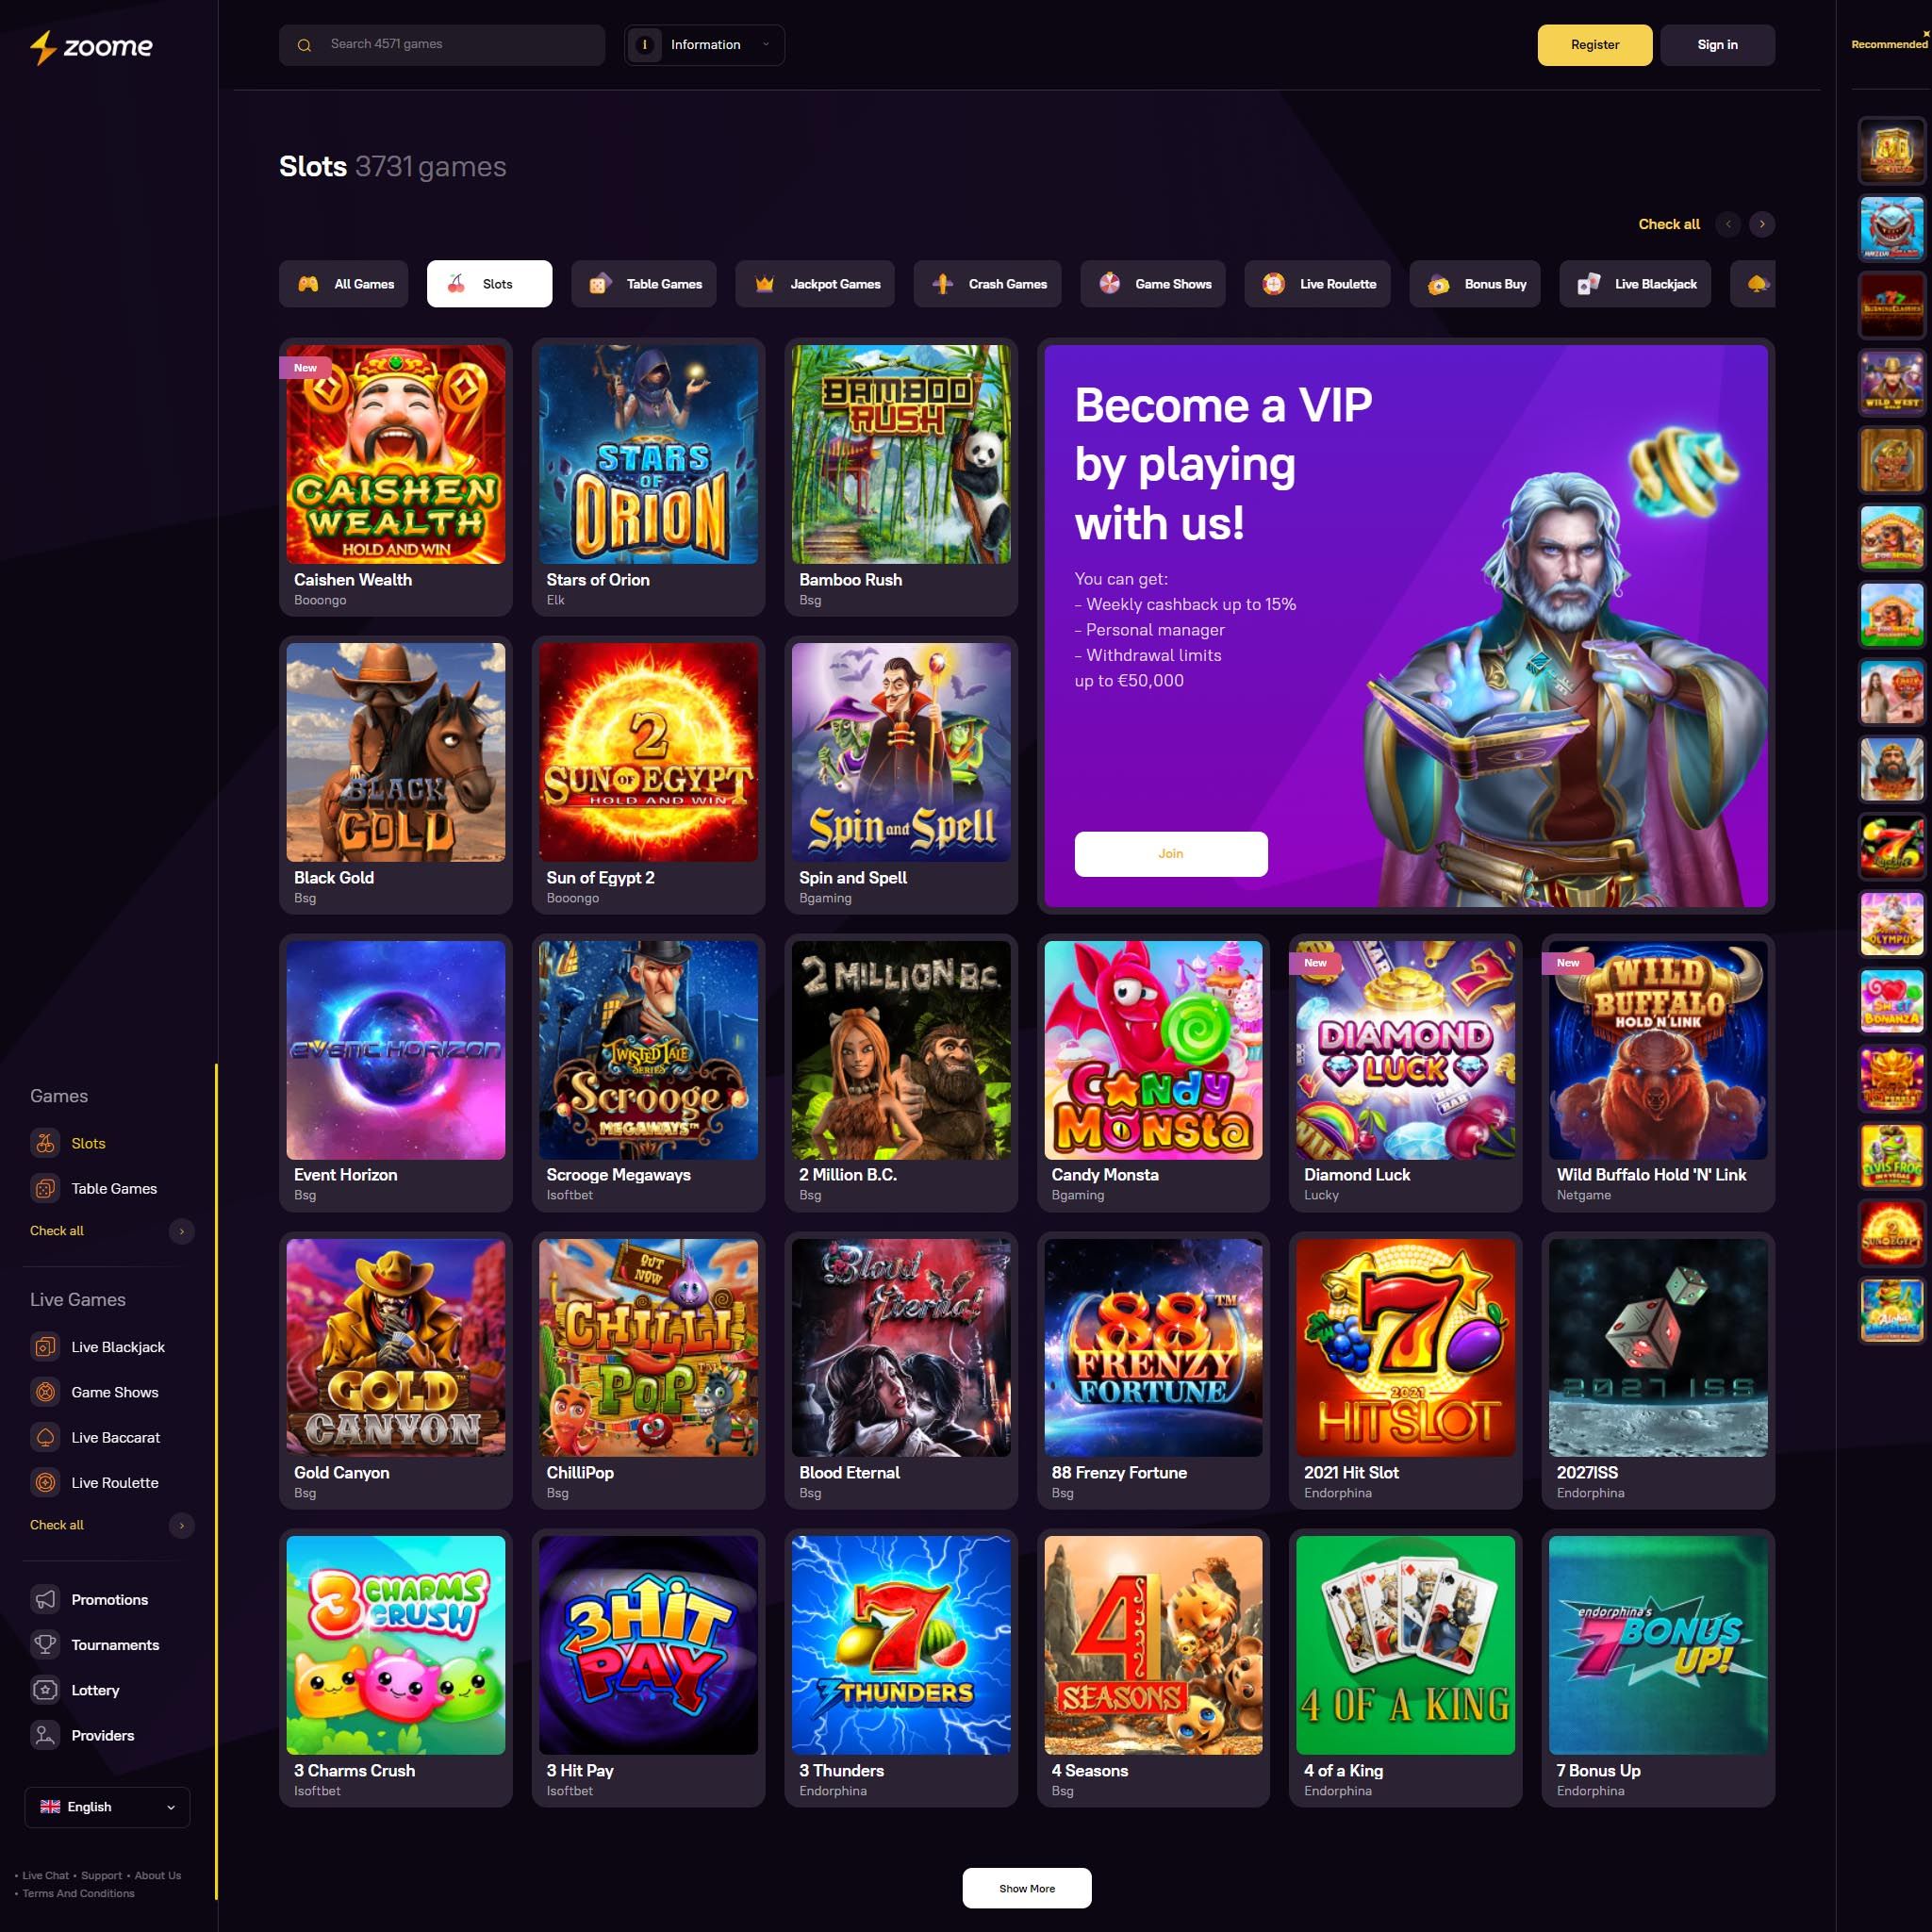 Zoome Casino full games catalogue